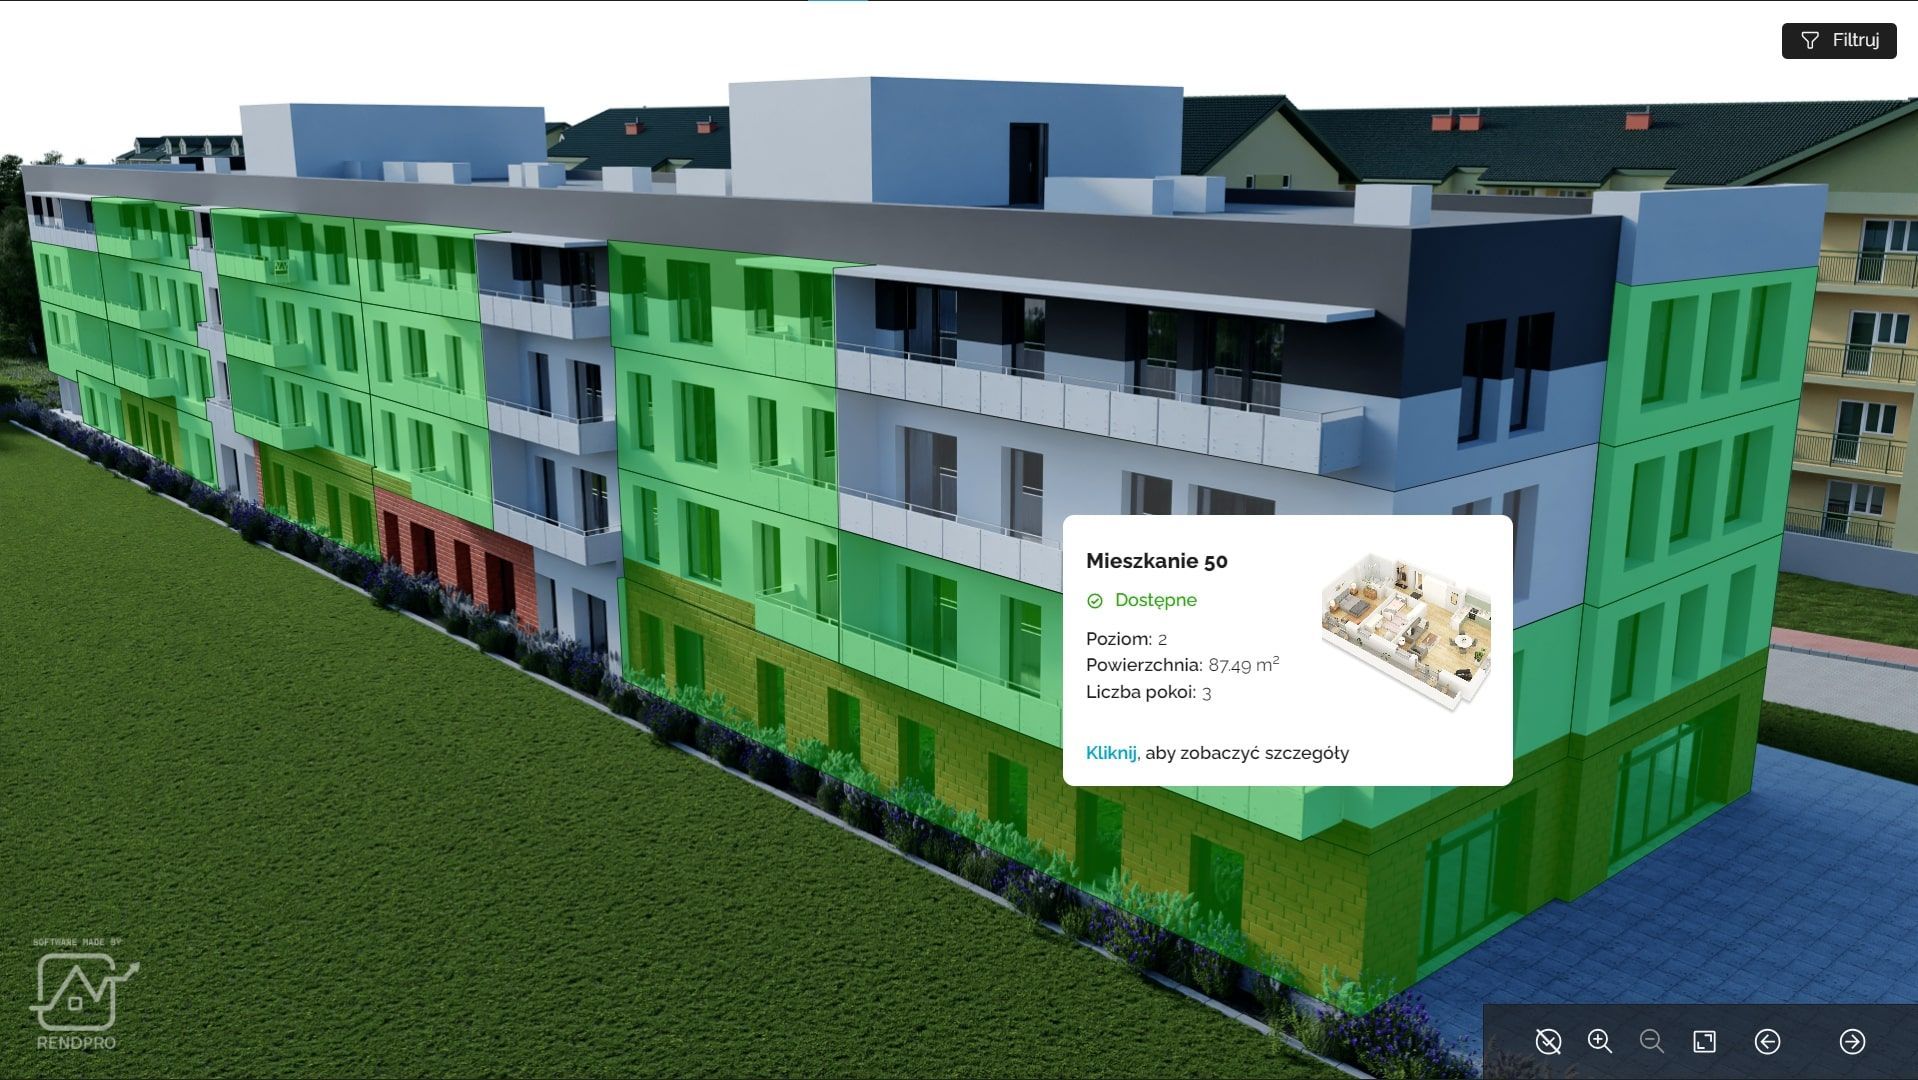 Interactive 3D Visualization - How Does It Speed Up the Sale of a Housing Estate?